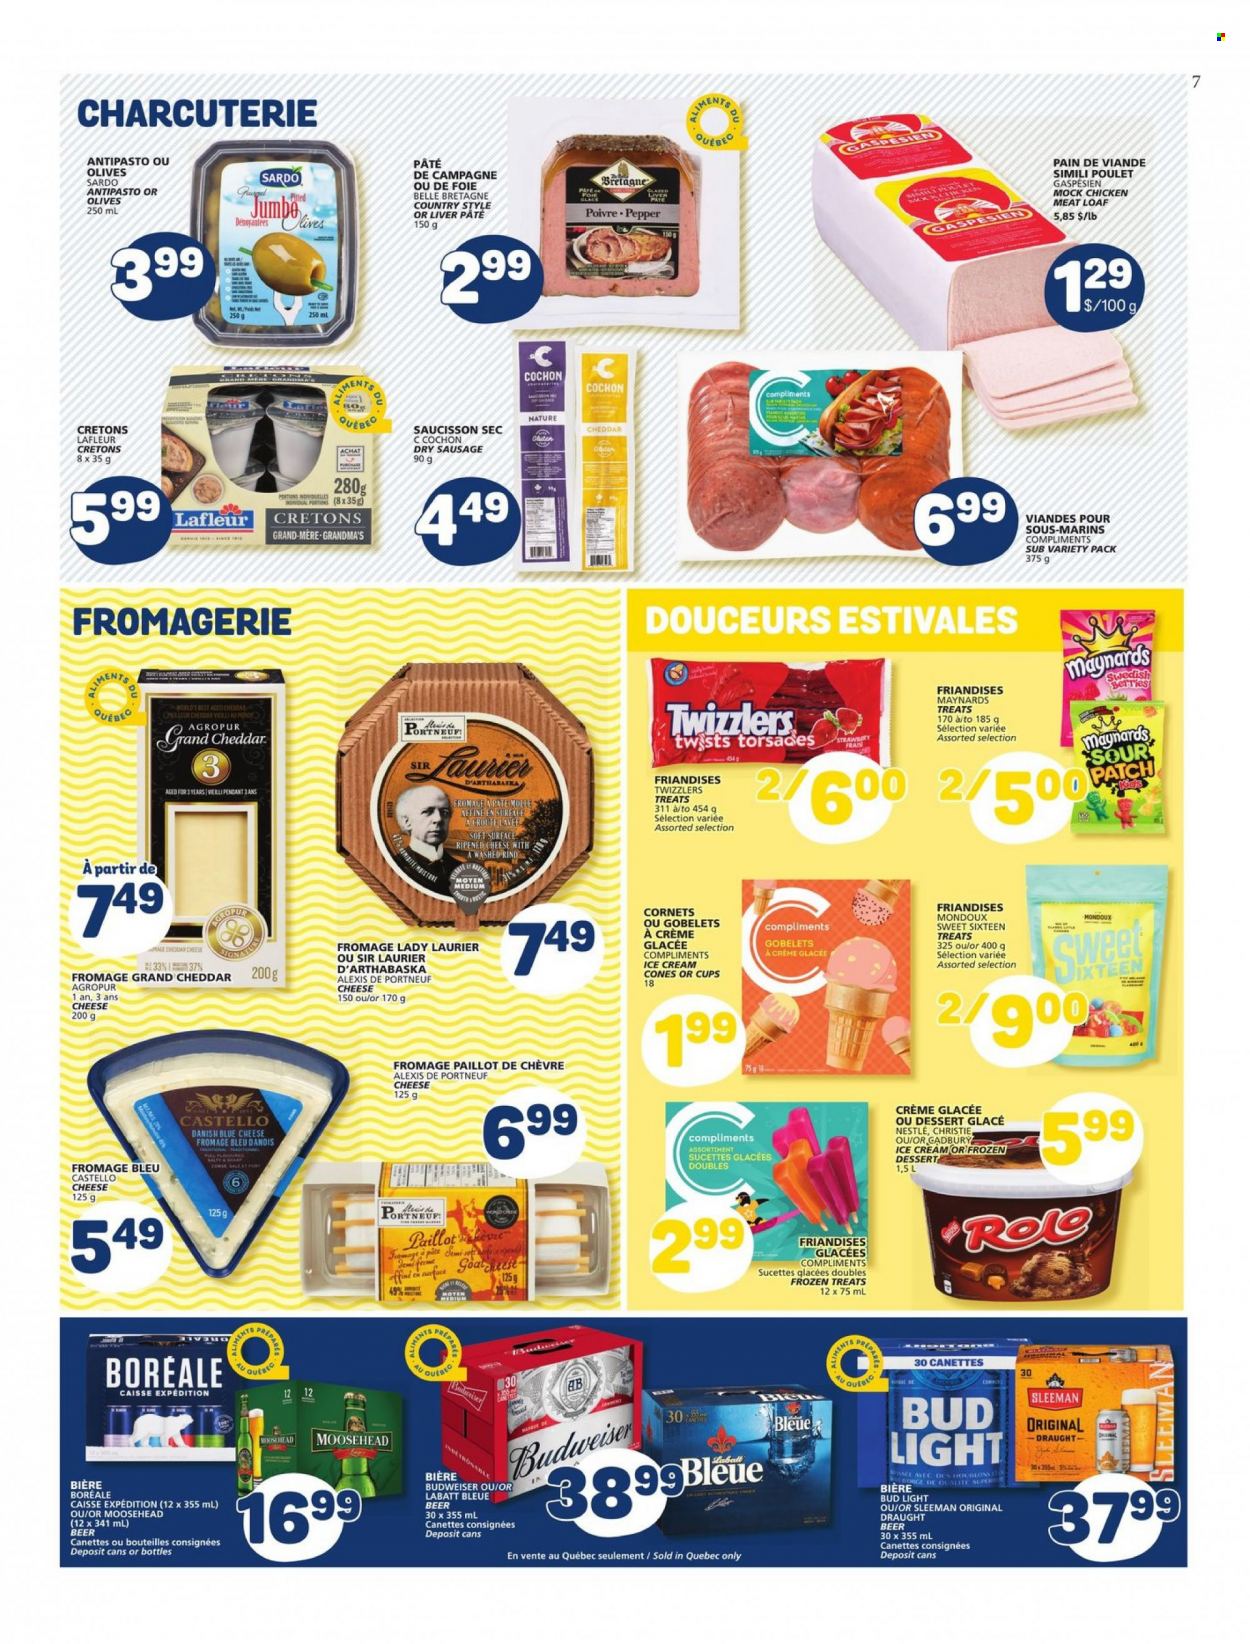 thumbnail - Marché Bonichoix Flyer - May 19, 2022 - May 25, 2022 - Sales products - Ace, sausage, cheddar, cheese, ice cream, sour patch, pepper, beer, Bud Light, chicken, Budweiser, Nestlé, olives. Page 7.